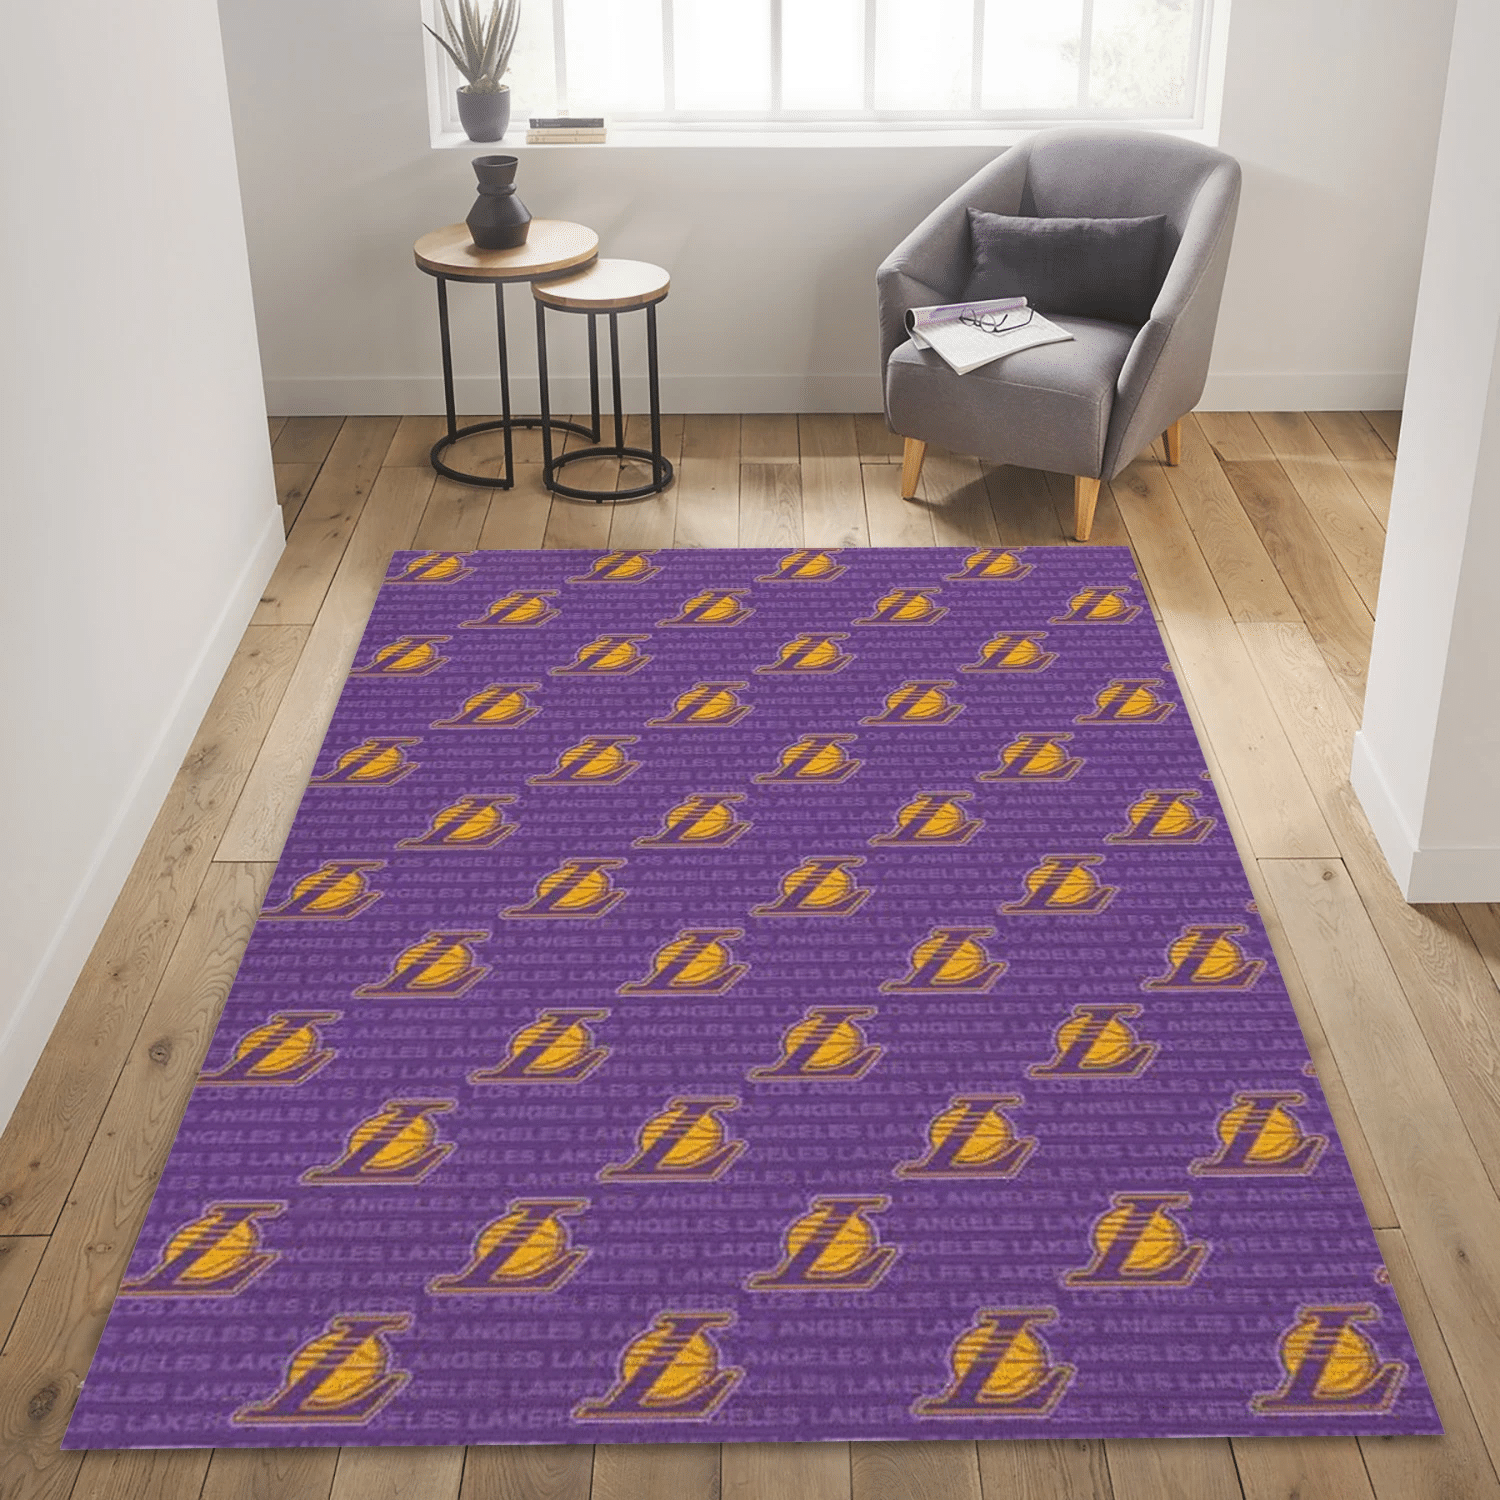 Los Angeles Lakers Patterns 1 Reangle Area Rug, Bedroom Rug - Family Gift US Decor - Indoor Outdoor Rugs 3